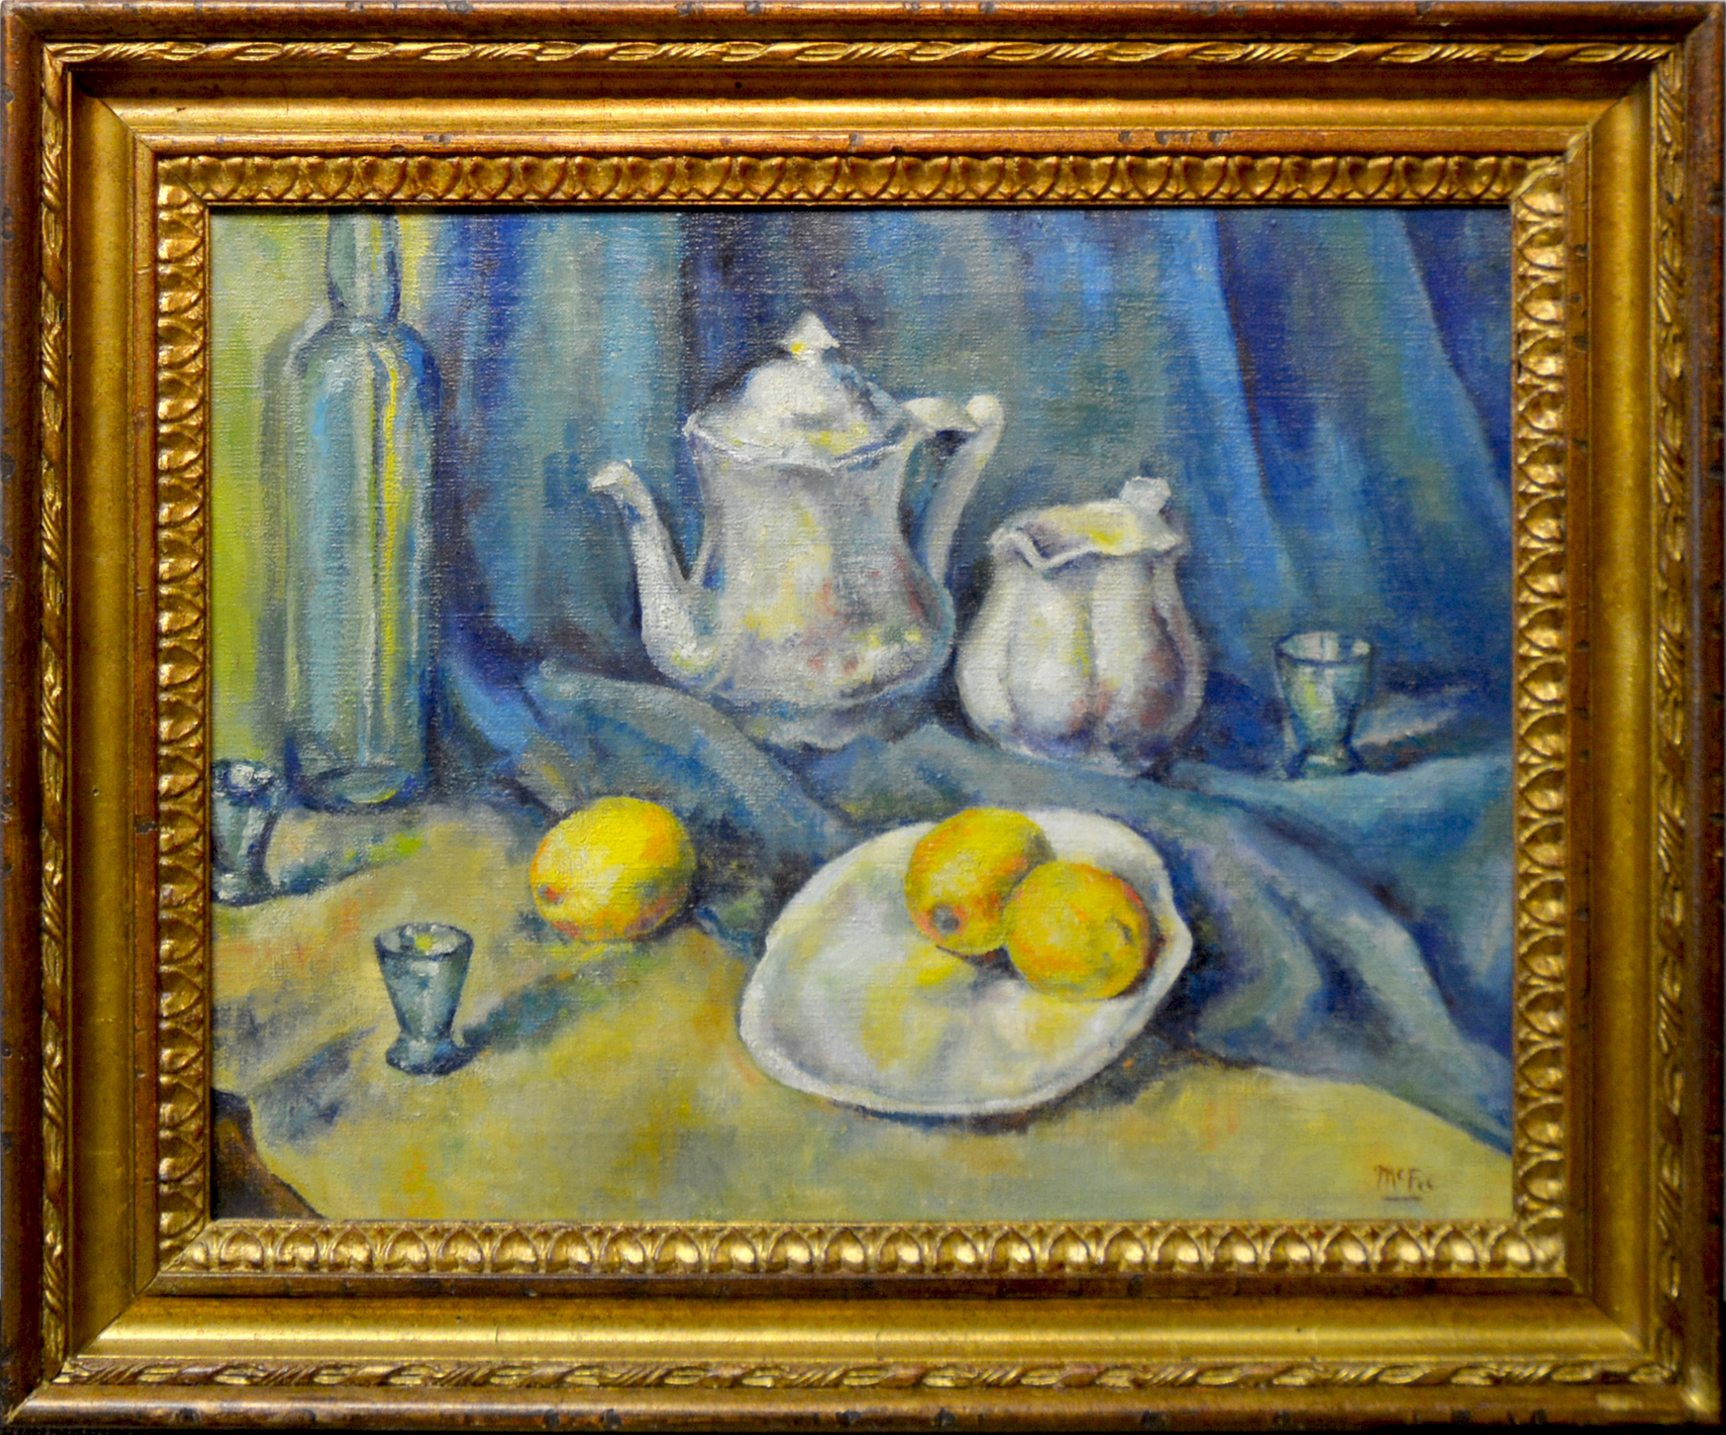 Still Life with Silver and Lemons” by Henry Lee McFee (1886-1953)